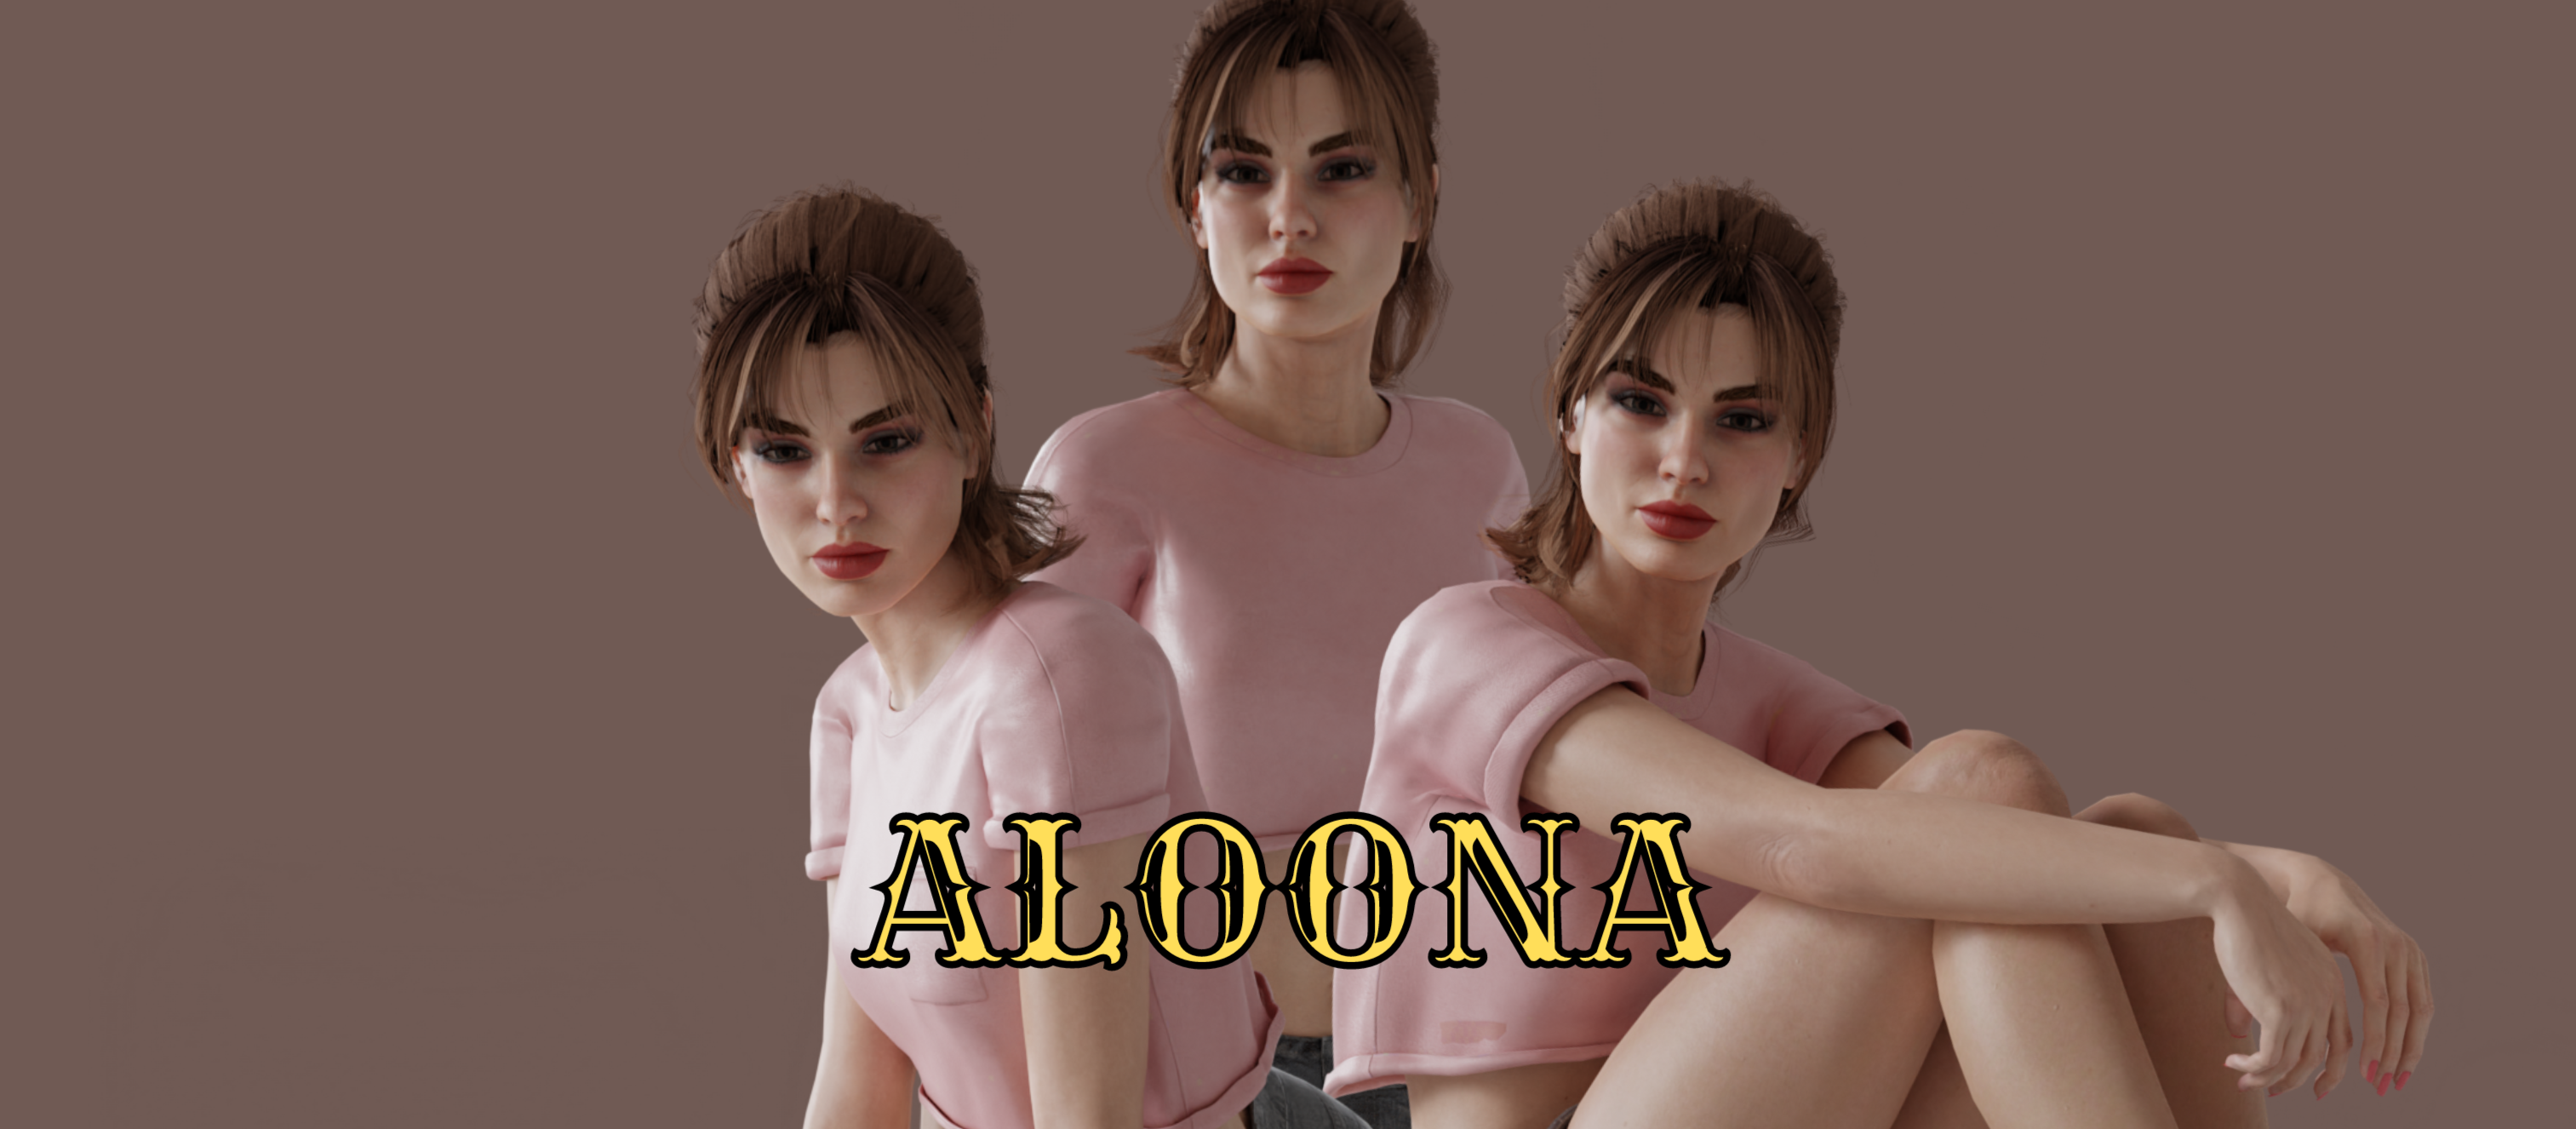 Aloona, The Girl With Hiking Boots - Rigged with PBR Textures